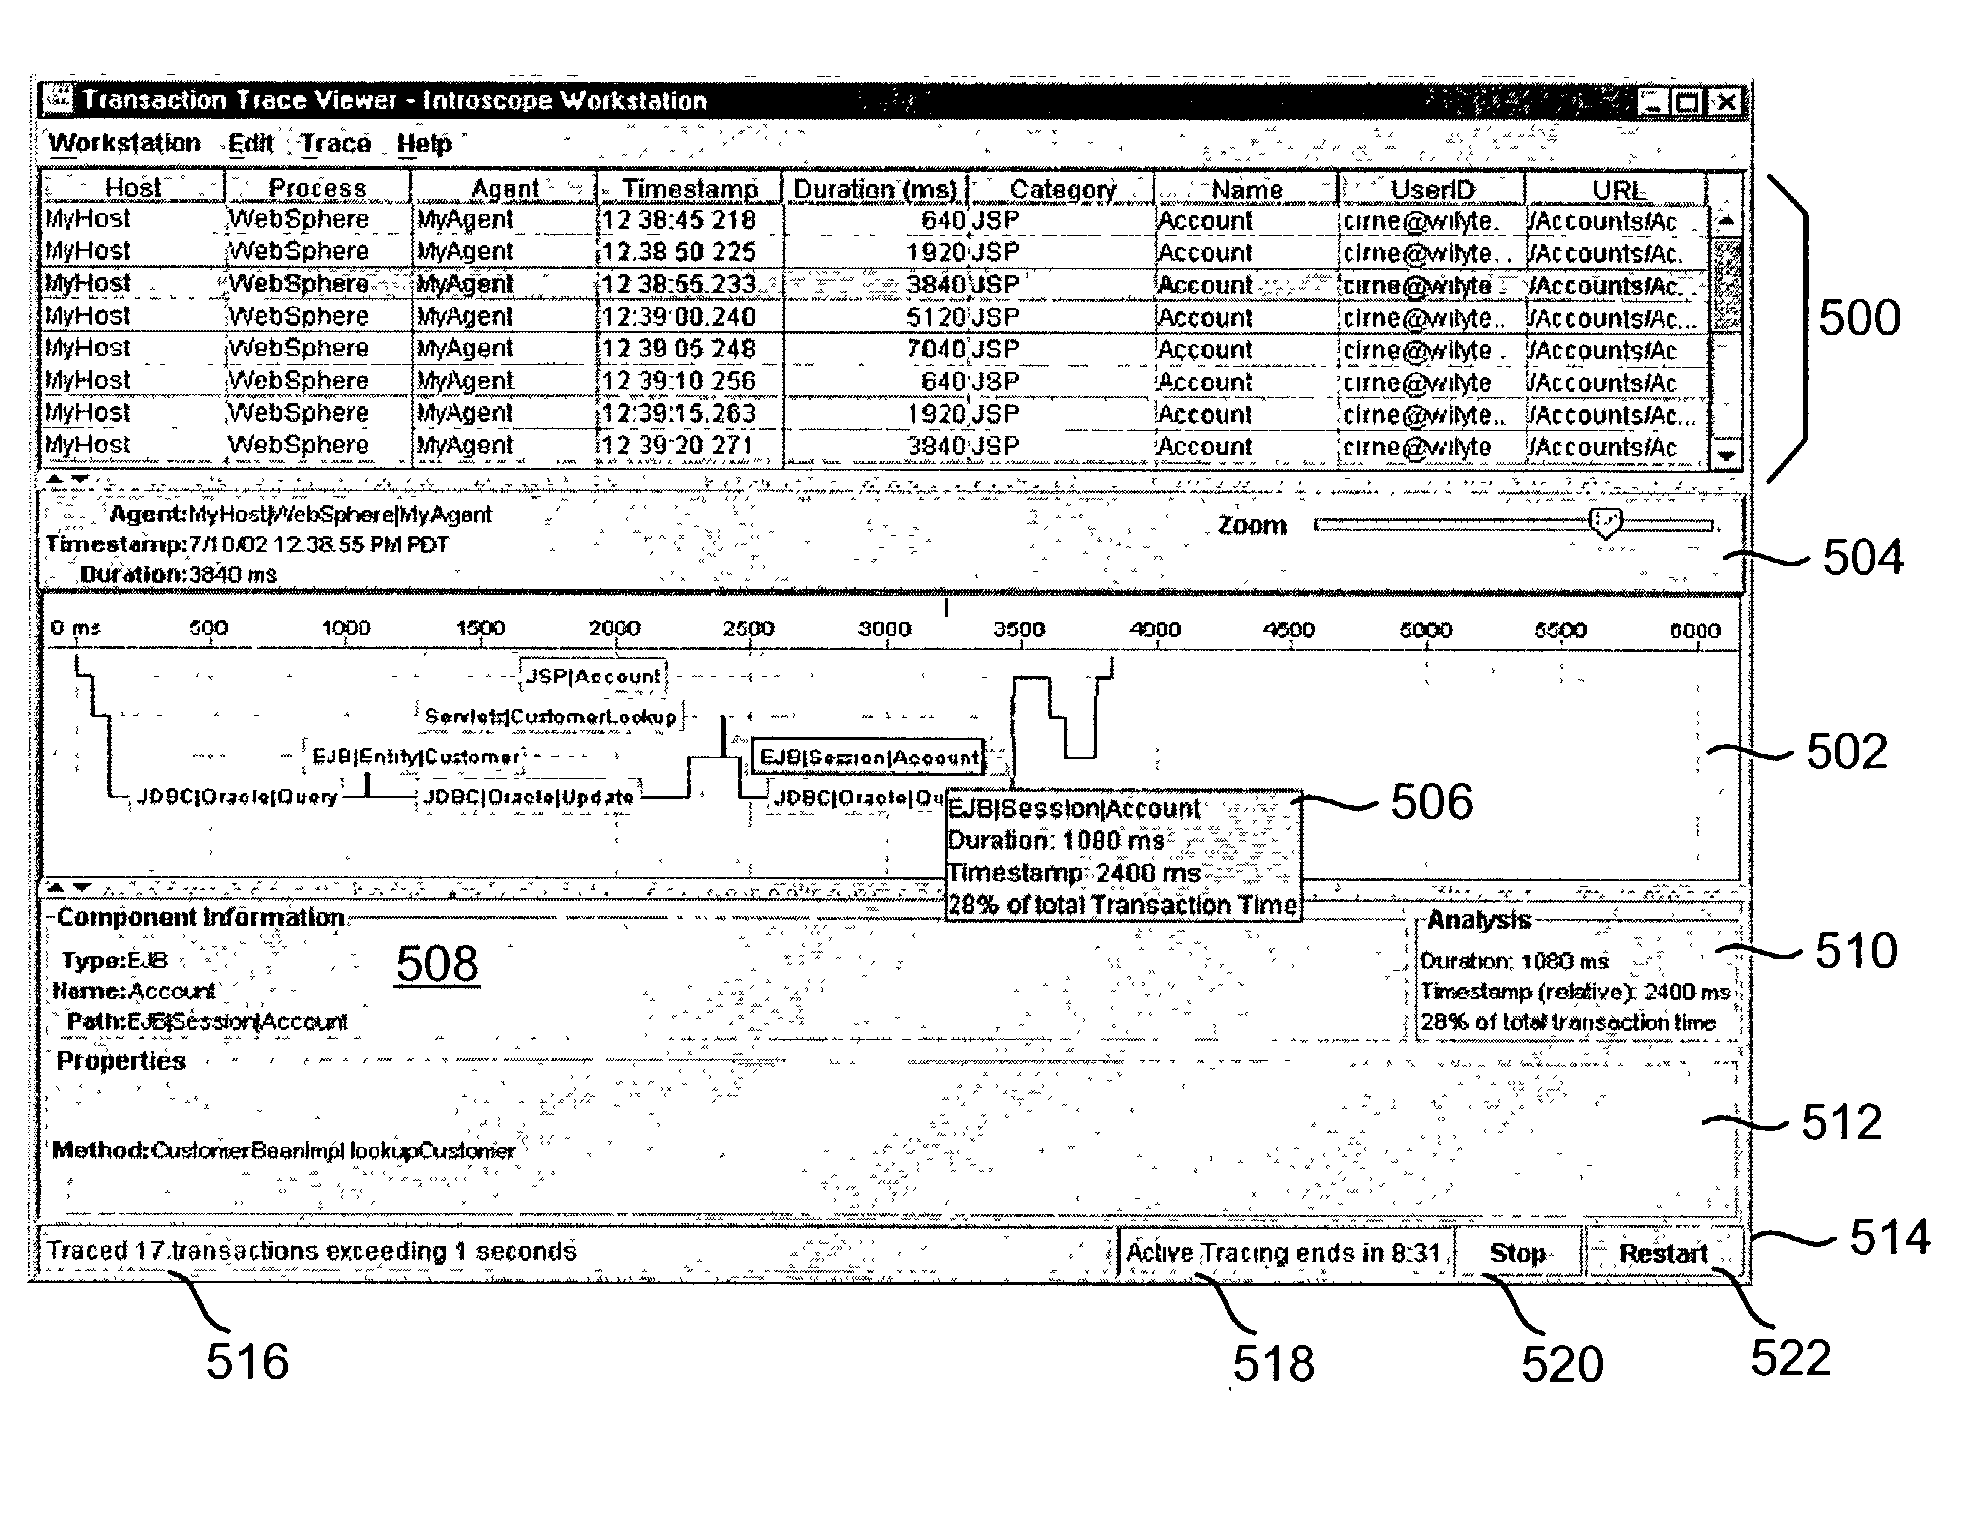 User interface for viewing performance information about transactions